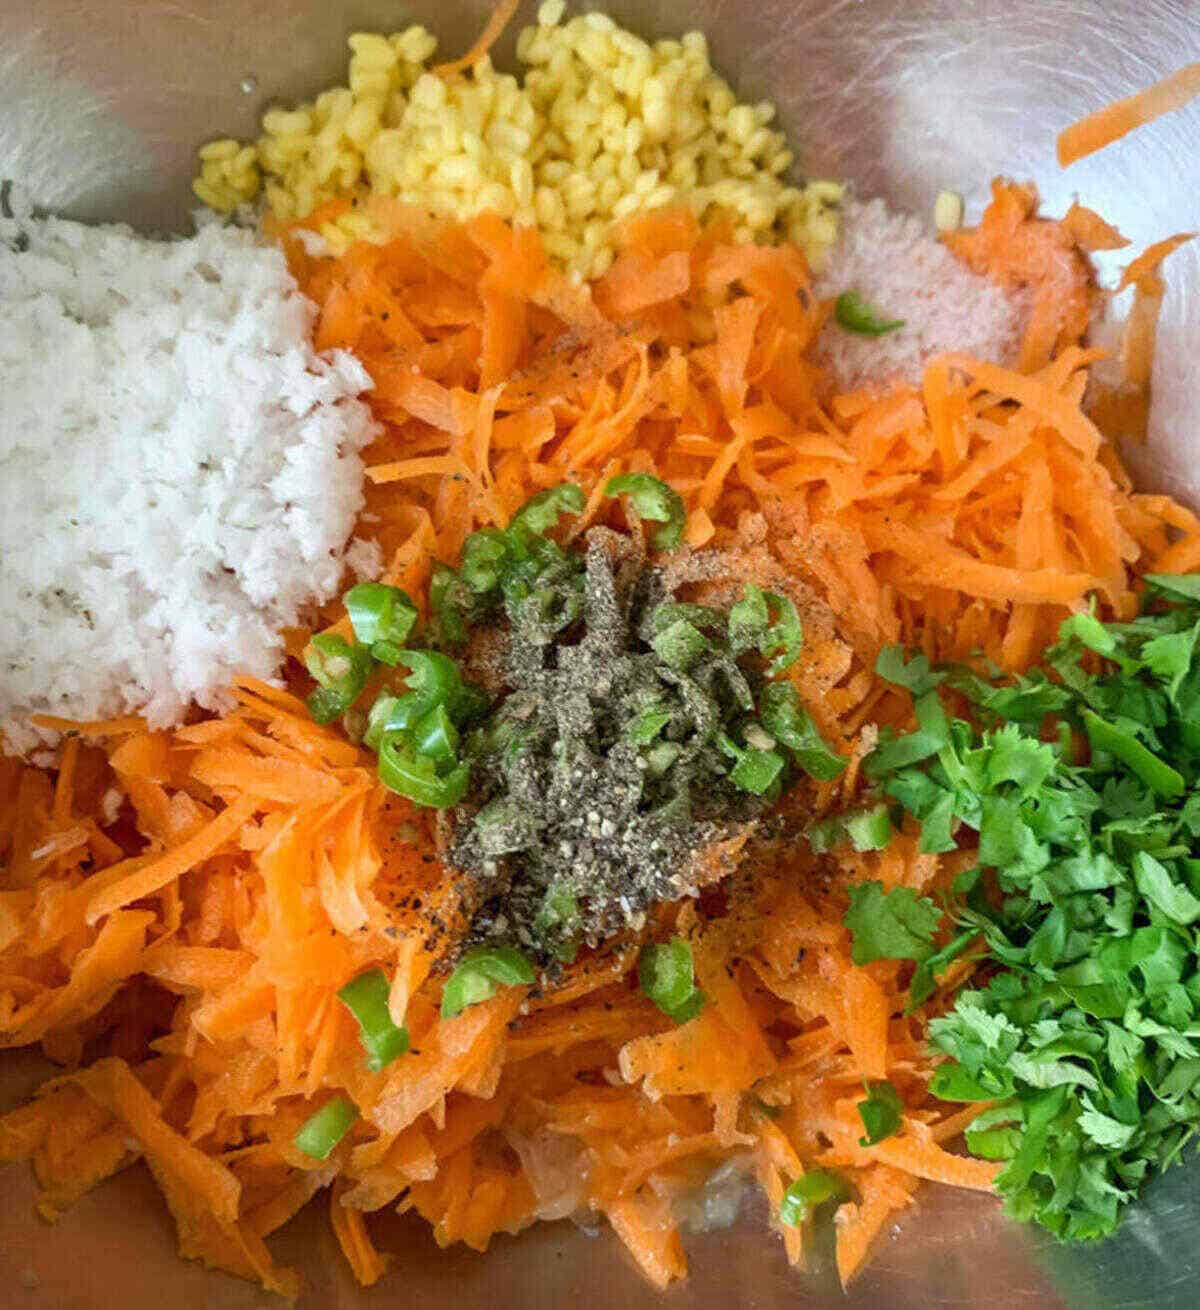 Mixing grated carrot and lentils with spices.